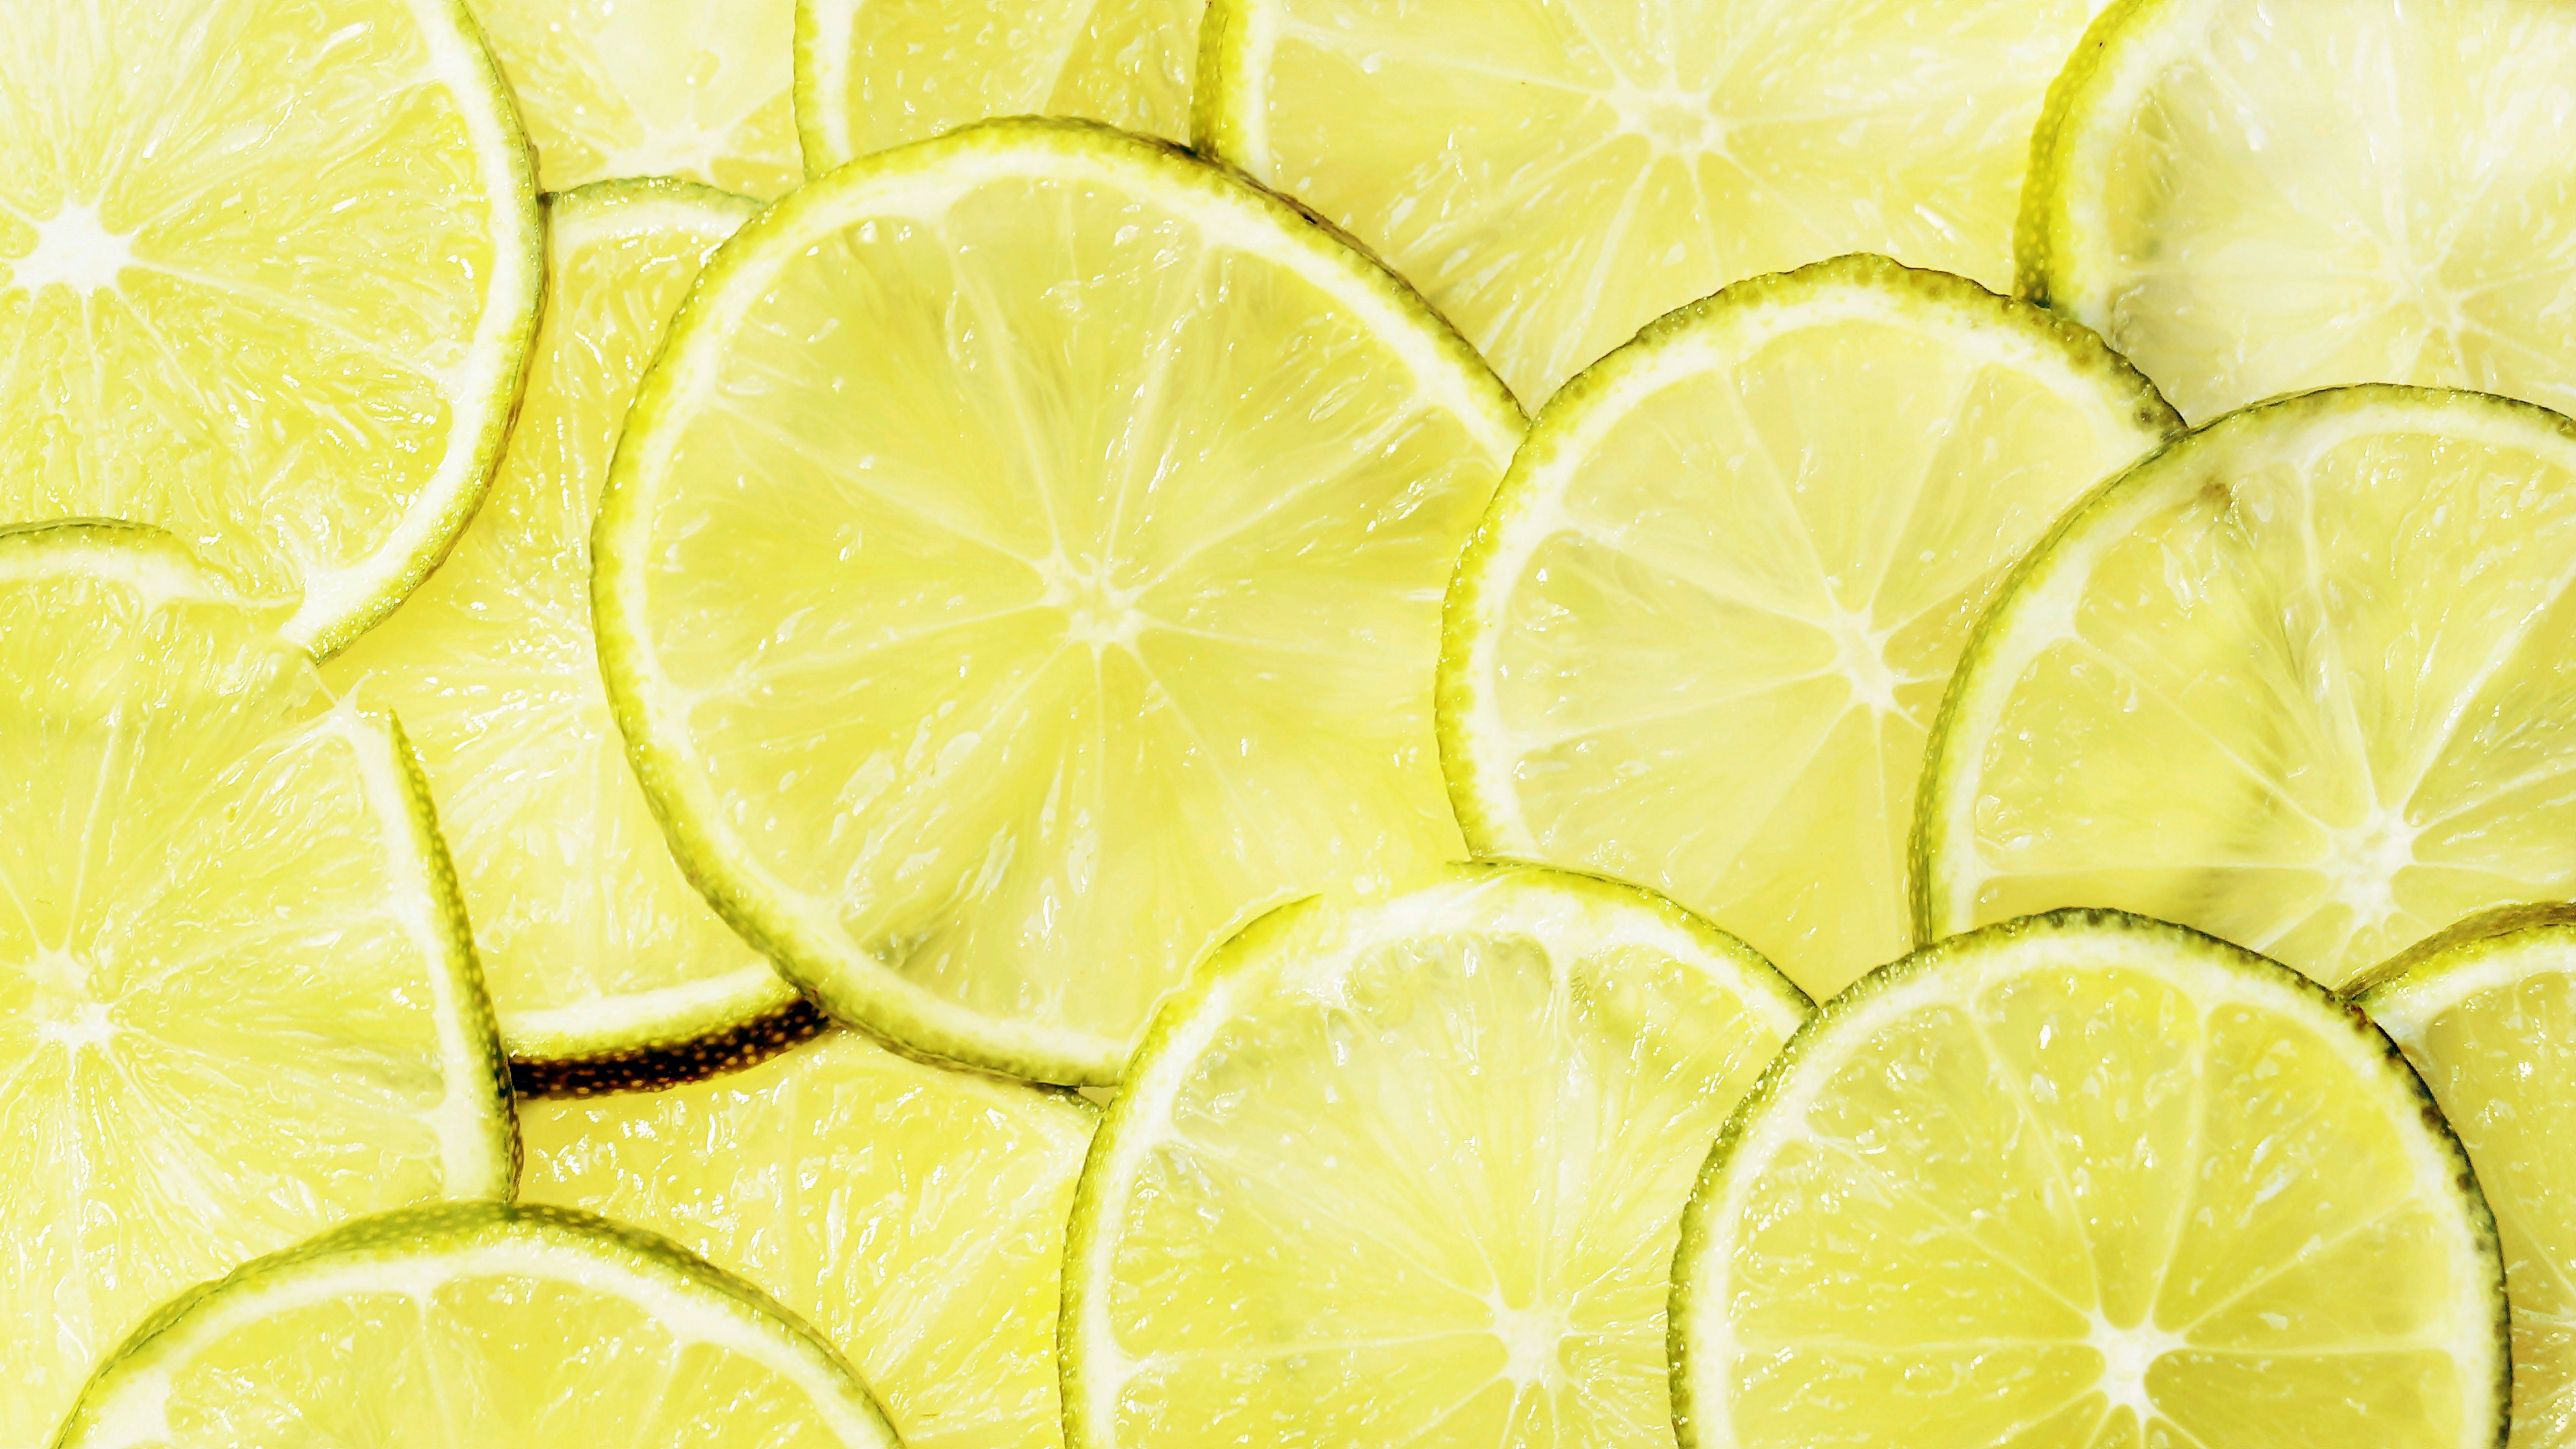 Yellow Lemon Fruit With Water Droplets. Wallpaper in 3840x2160 Resolution